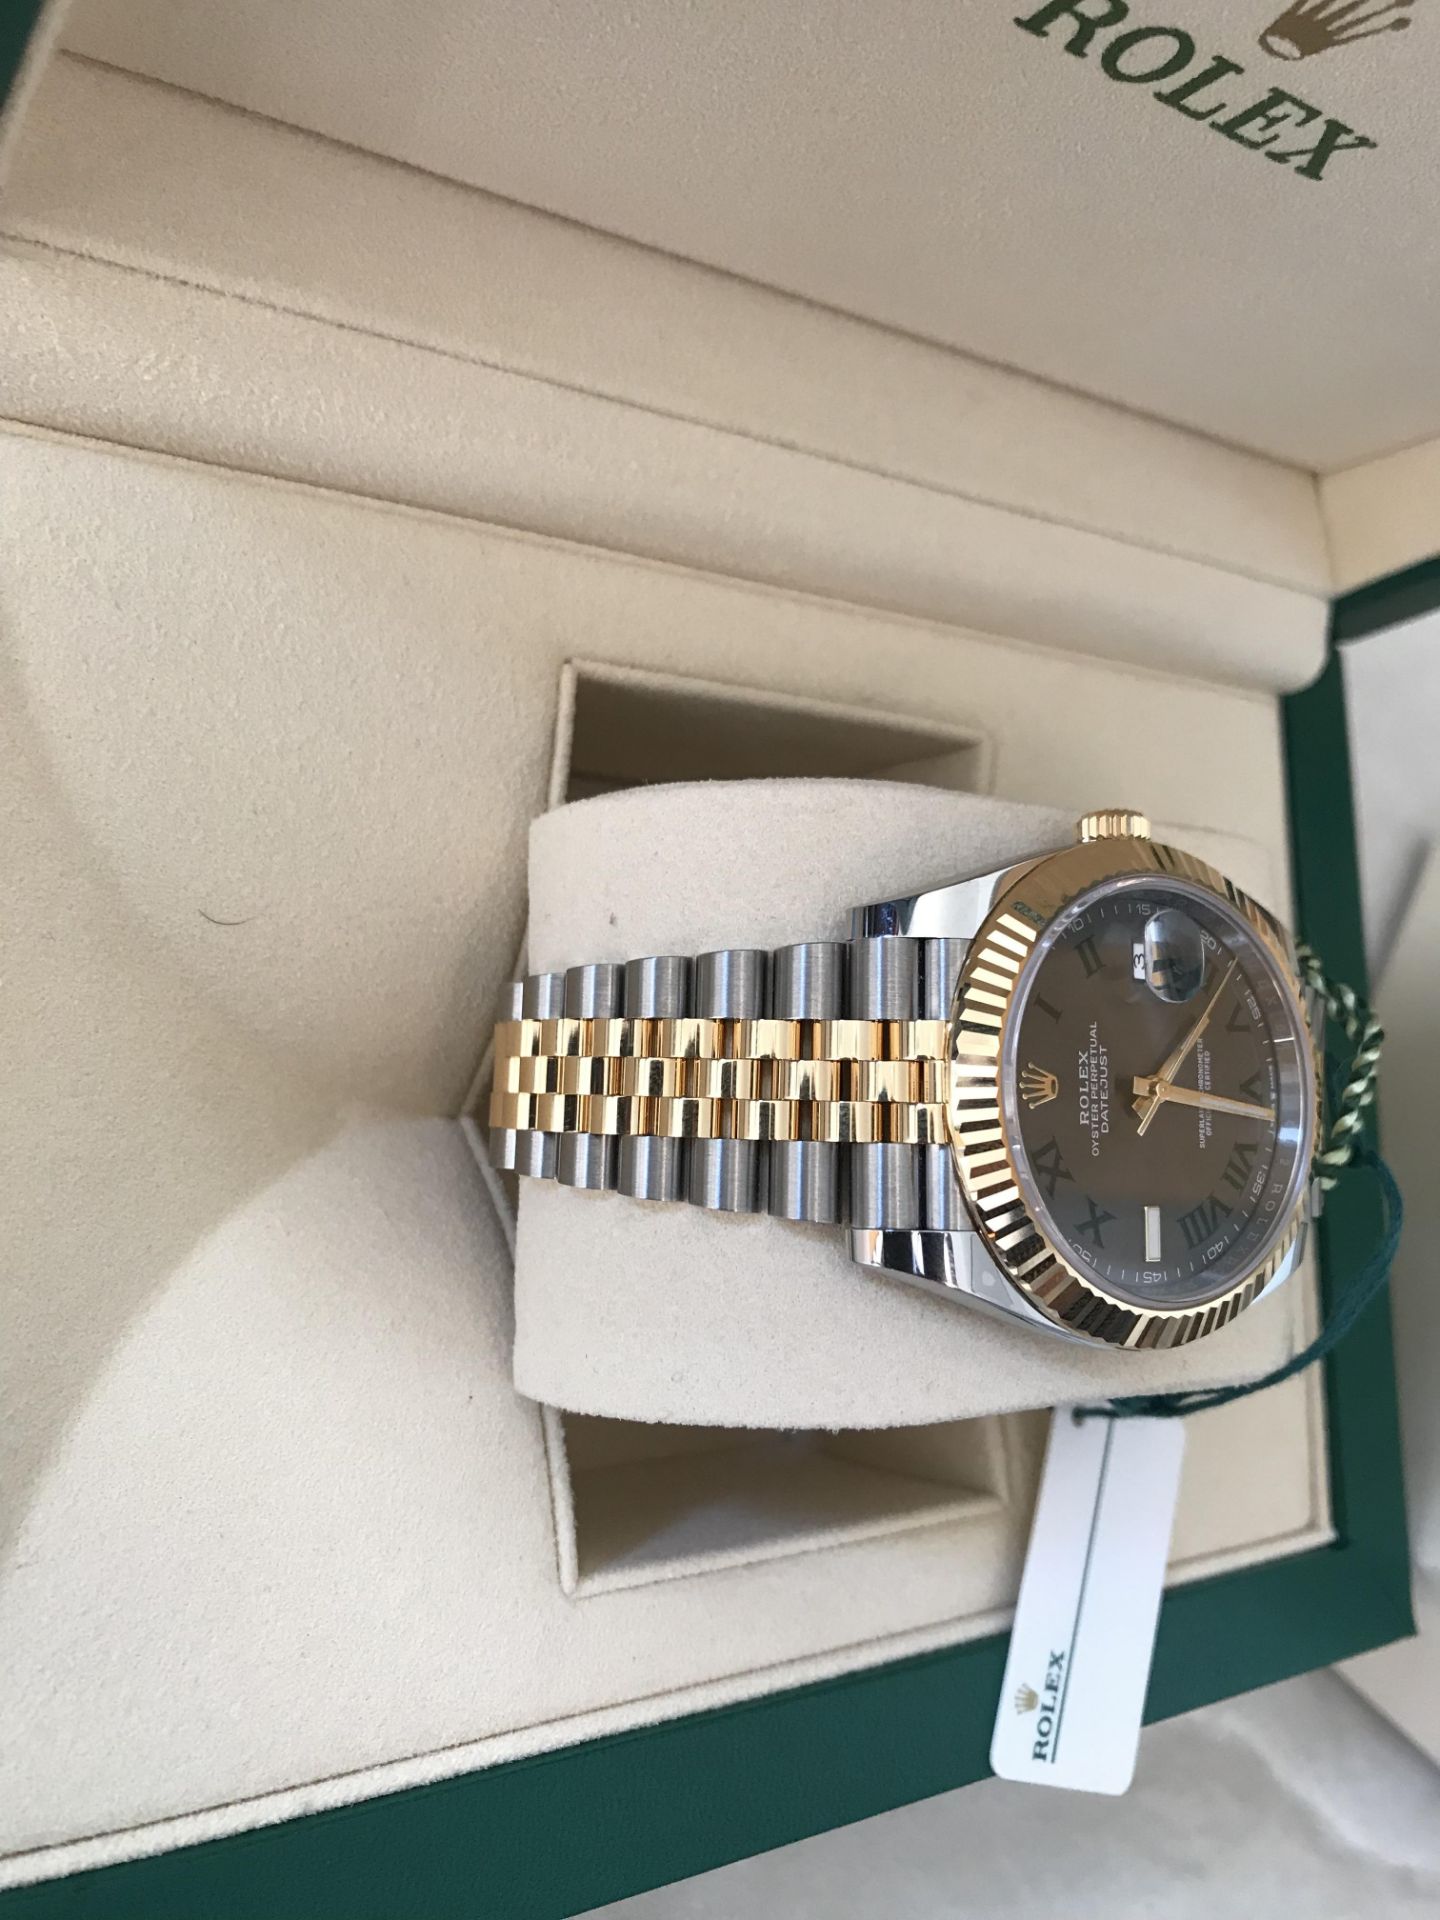 2019 ROLEX GOLD JUBILEE BIMETAL WIMBLEDON DATE JUST 41 OYSTER 41 MM OYSTERSTEEL AND YELLOW GOLD - Image 8 of 12